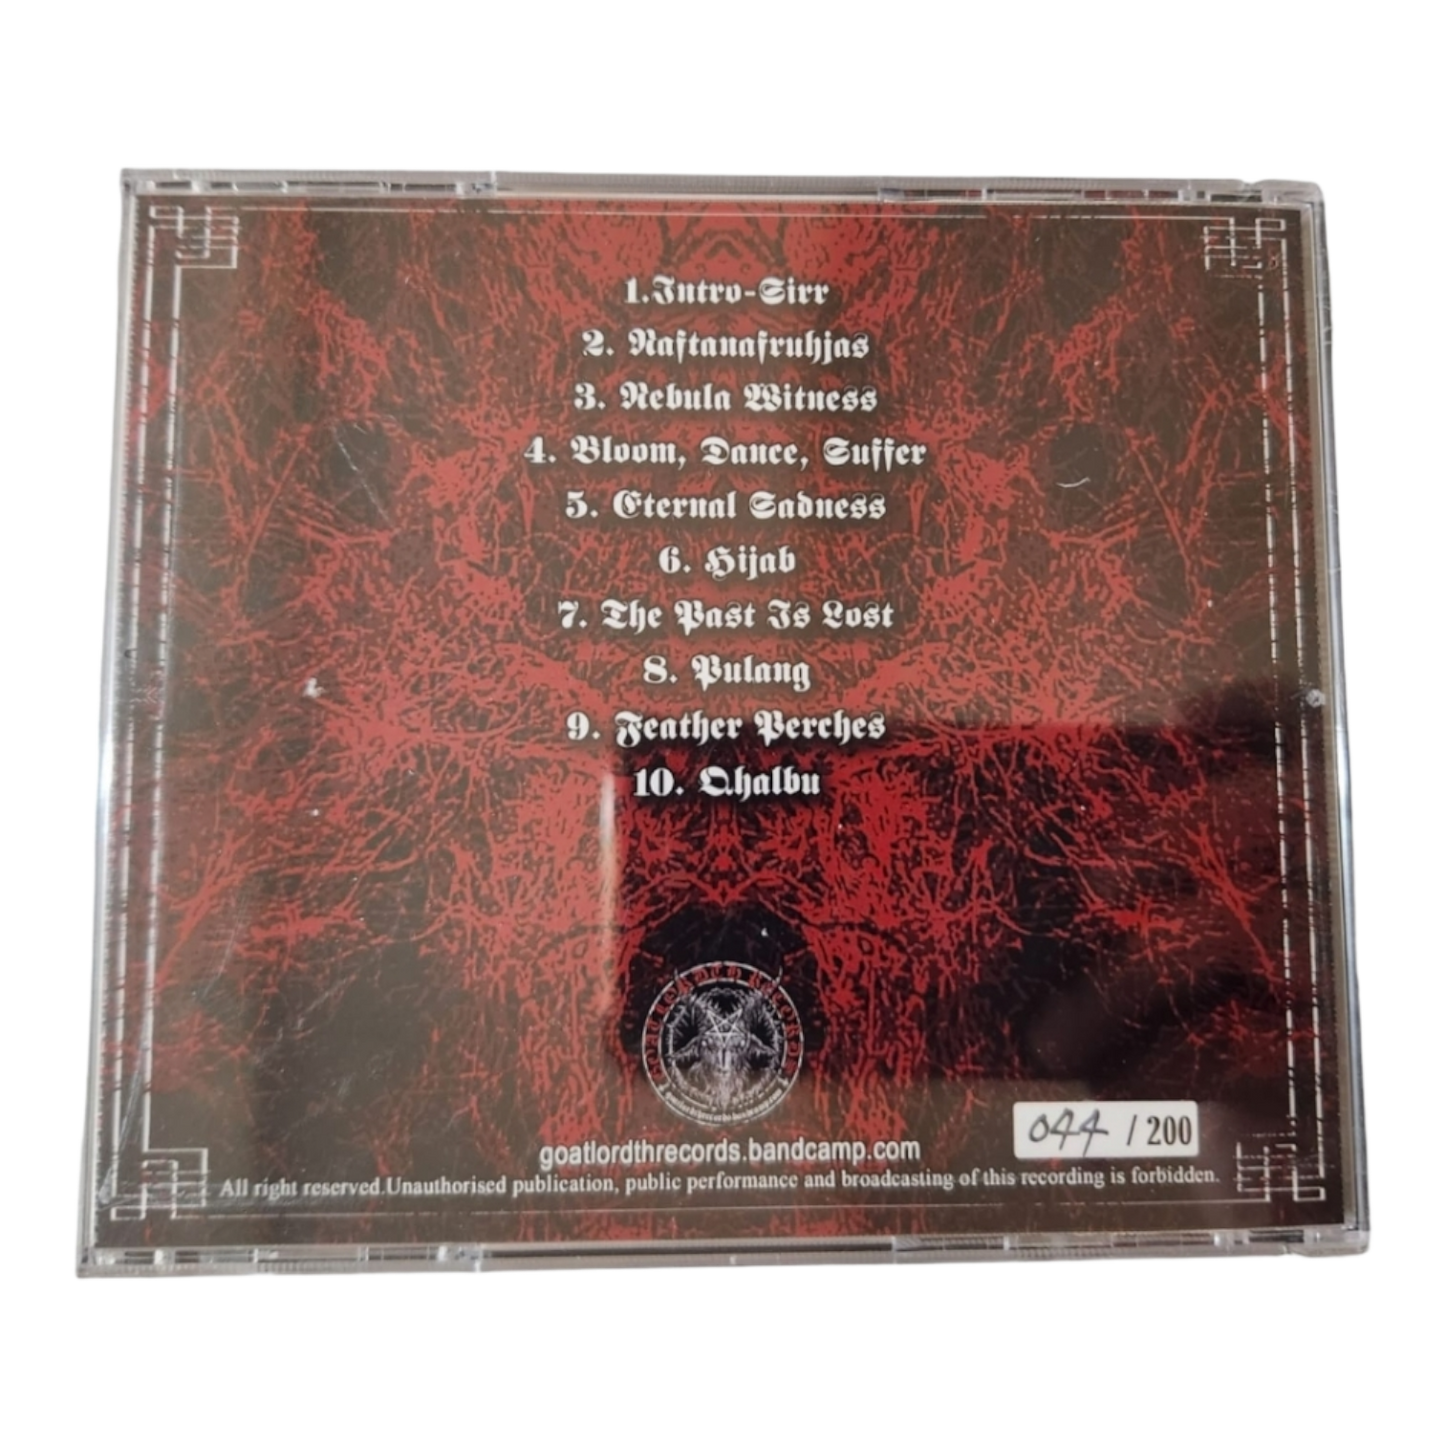 AL AZAZHIL [Black Metal MYS] - From Solitude to Insanity CD (New)